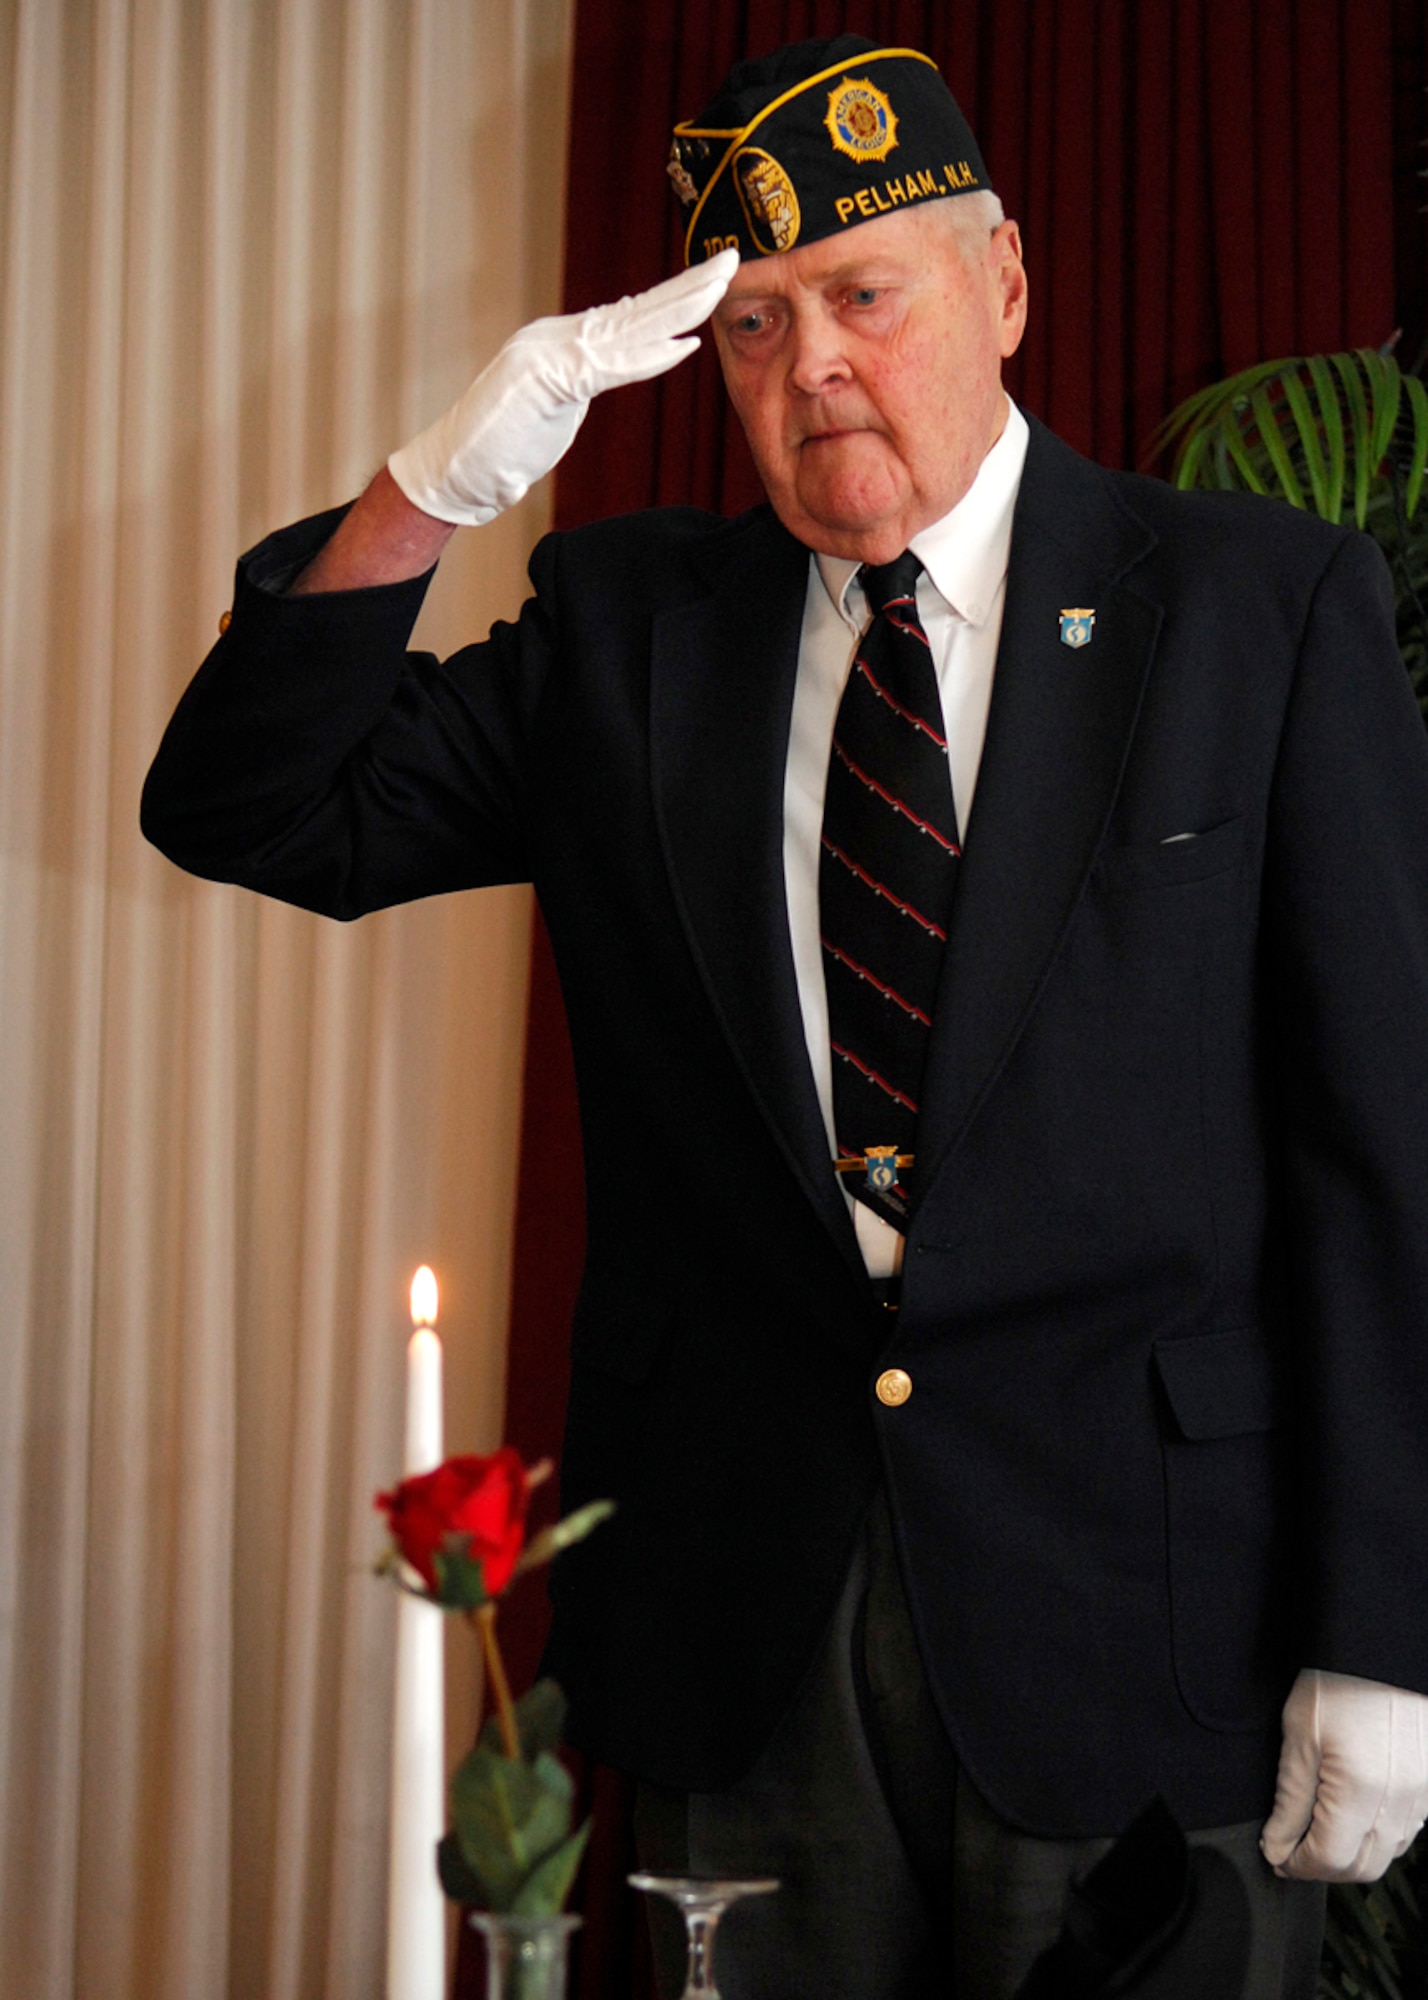 Herman Hanson participates in the Prisoner of War, Missing in Action ceremony Feb. 23 at the Minuteman Club during the Honor Guard banquet. Mr. Hanson is a member of American Legion Post 48 in Hudson, N.H. The banquet recognized members of the Patriot Honor Guard as well as other area honor guard members. (US Air Force Photo by Mark Wyatt)